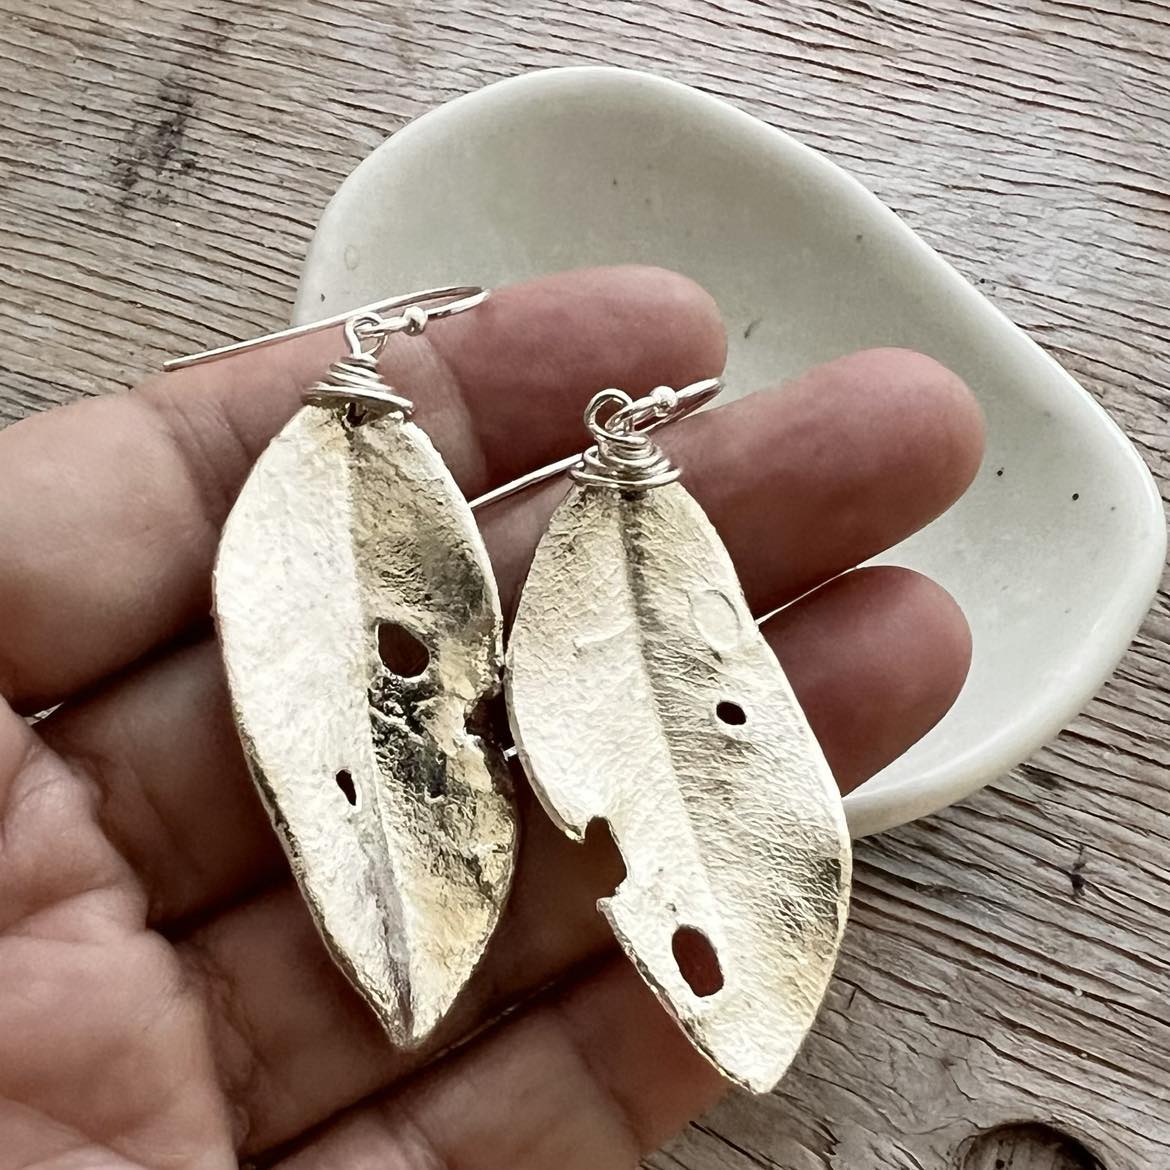 Pohutukawa Leaf With Holes Perfect Imperfection Earrings 4